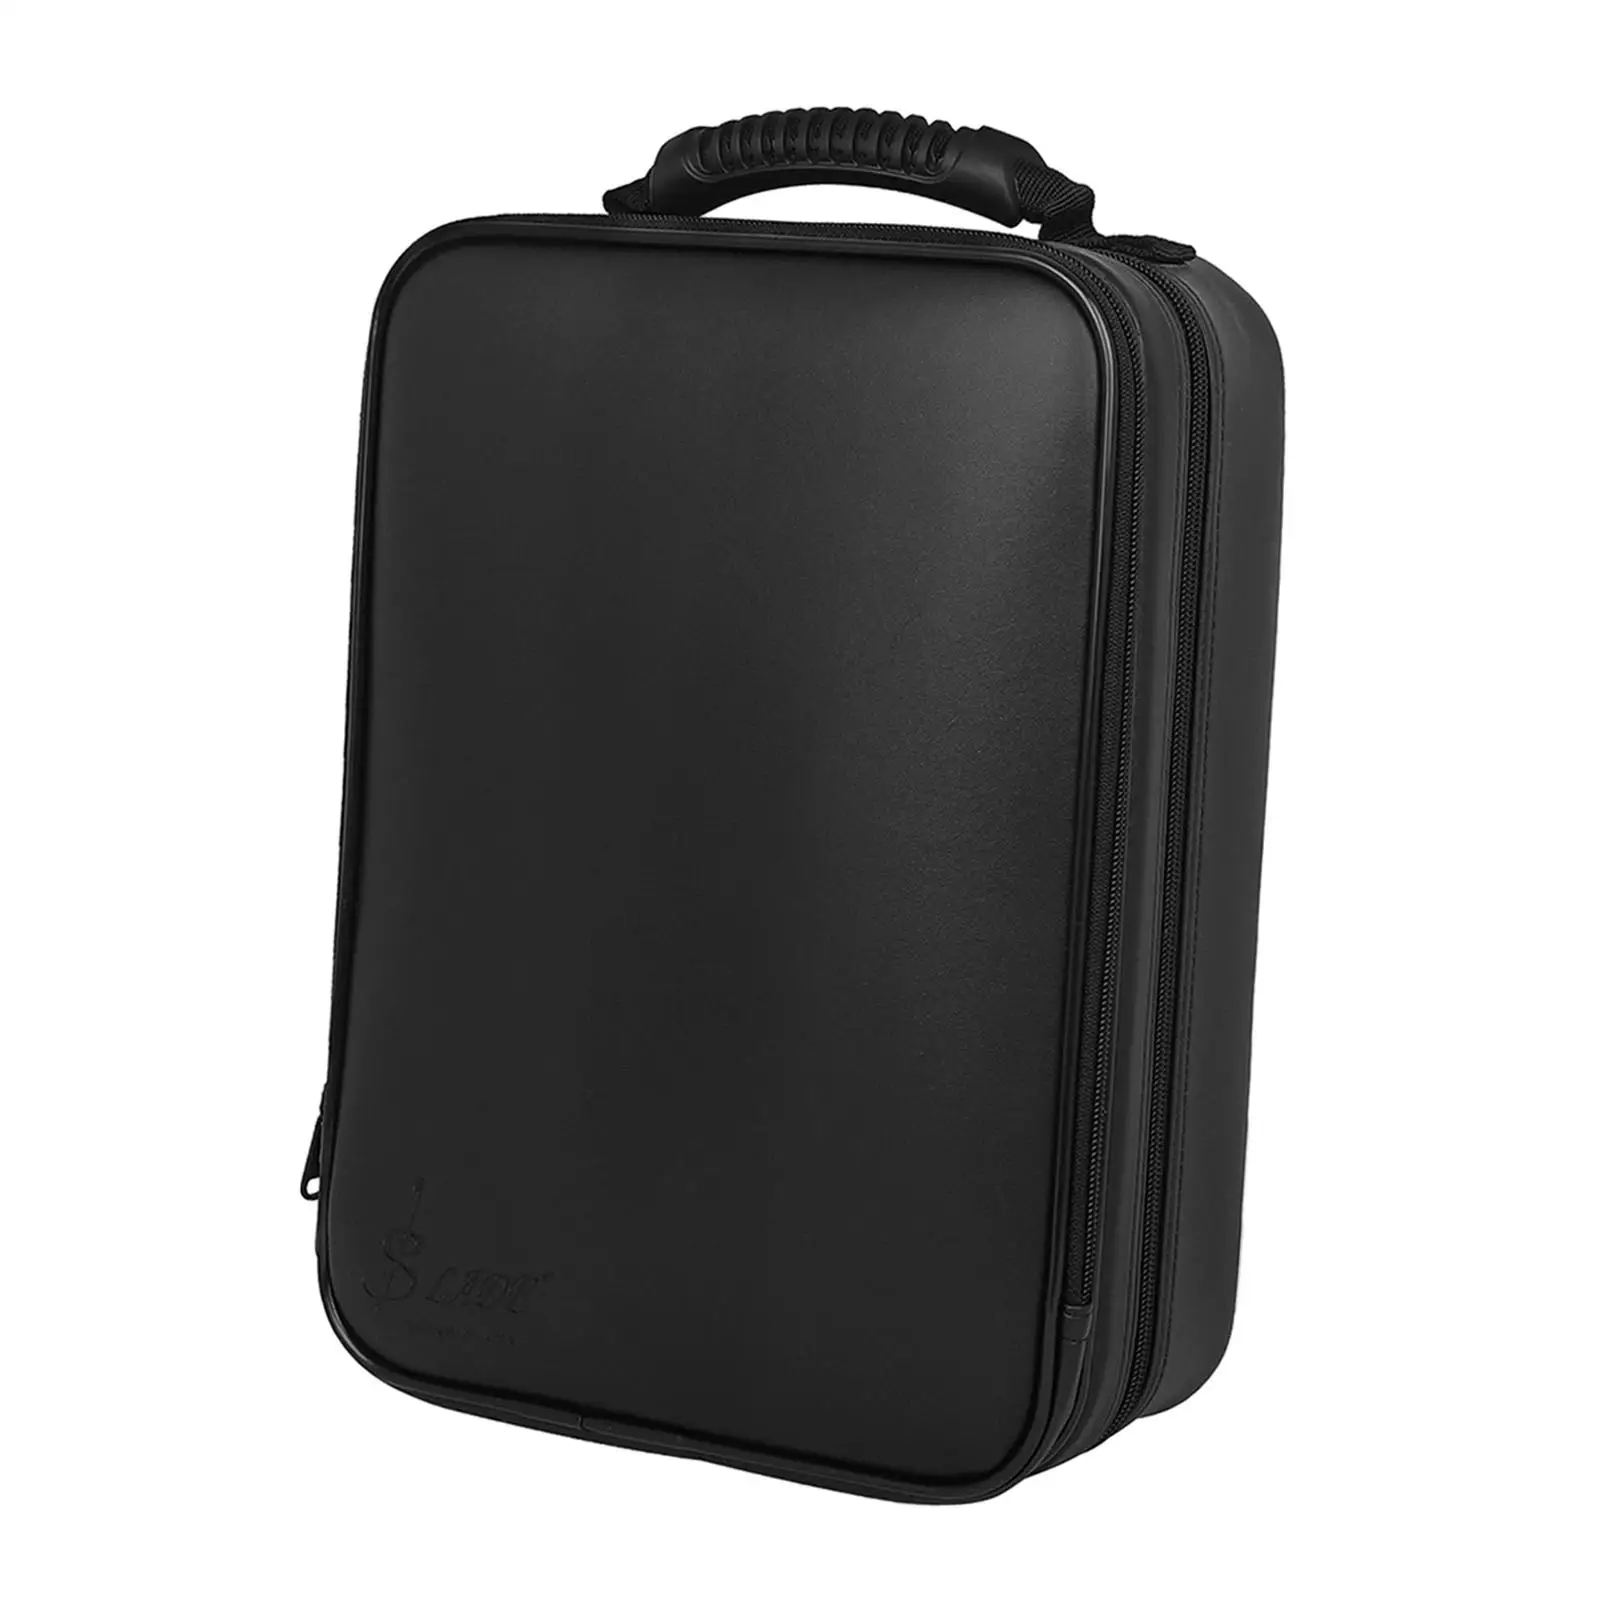 Clarinet Gig Bag PU Leather Portable Storage Box Clarinet Bag for Outdoor